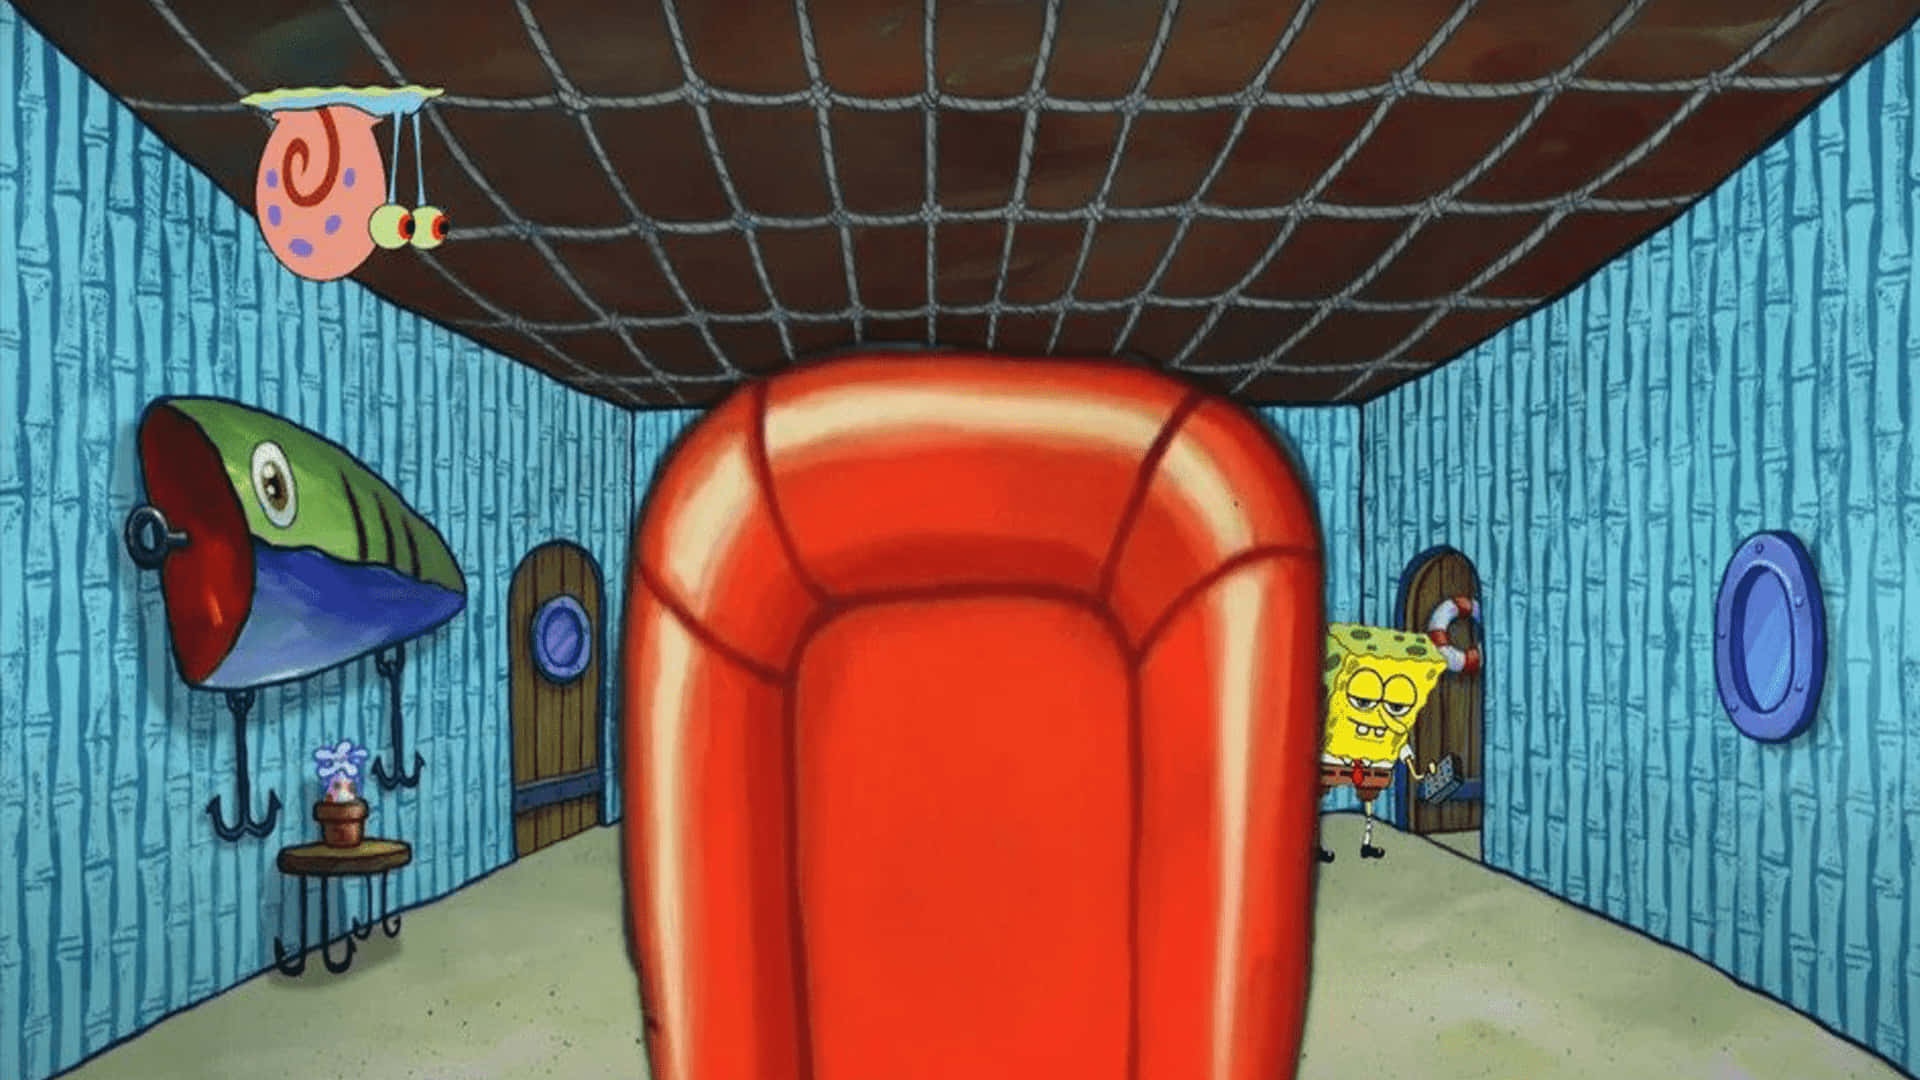 Spongebob Squarepants - Room With A Red Chair